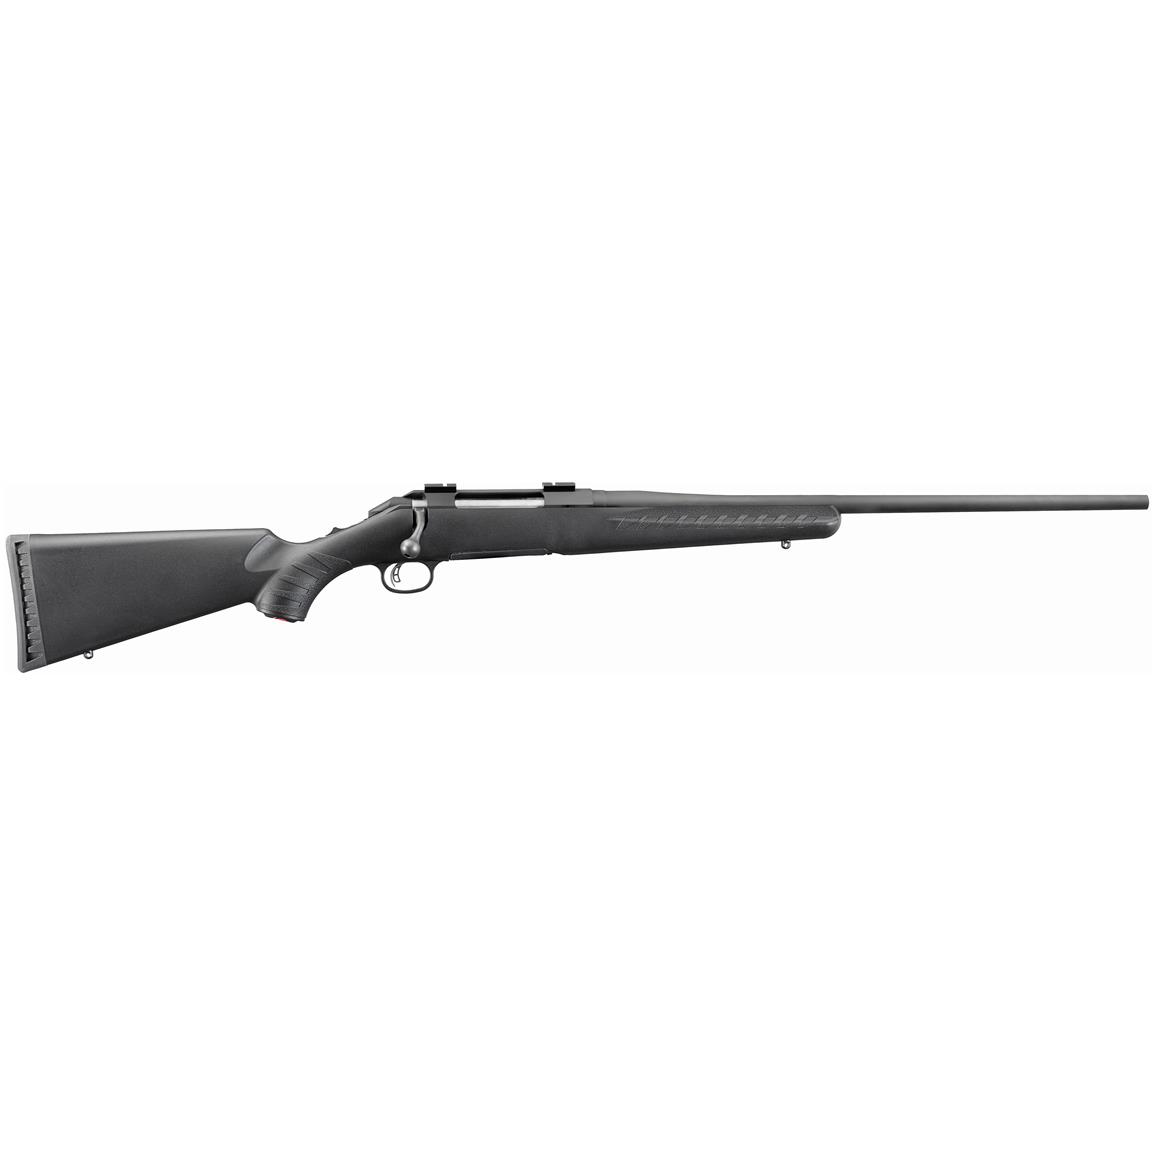 Ruger American Rifle, Bolt Action, .270 Winchester, Centerfire, 22" Barrel, 4 Rounds